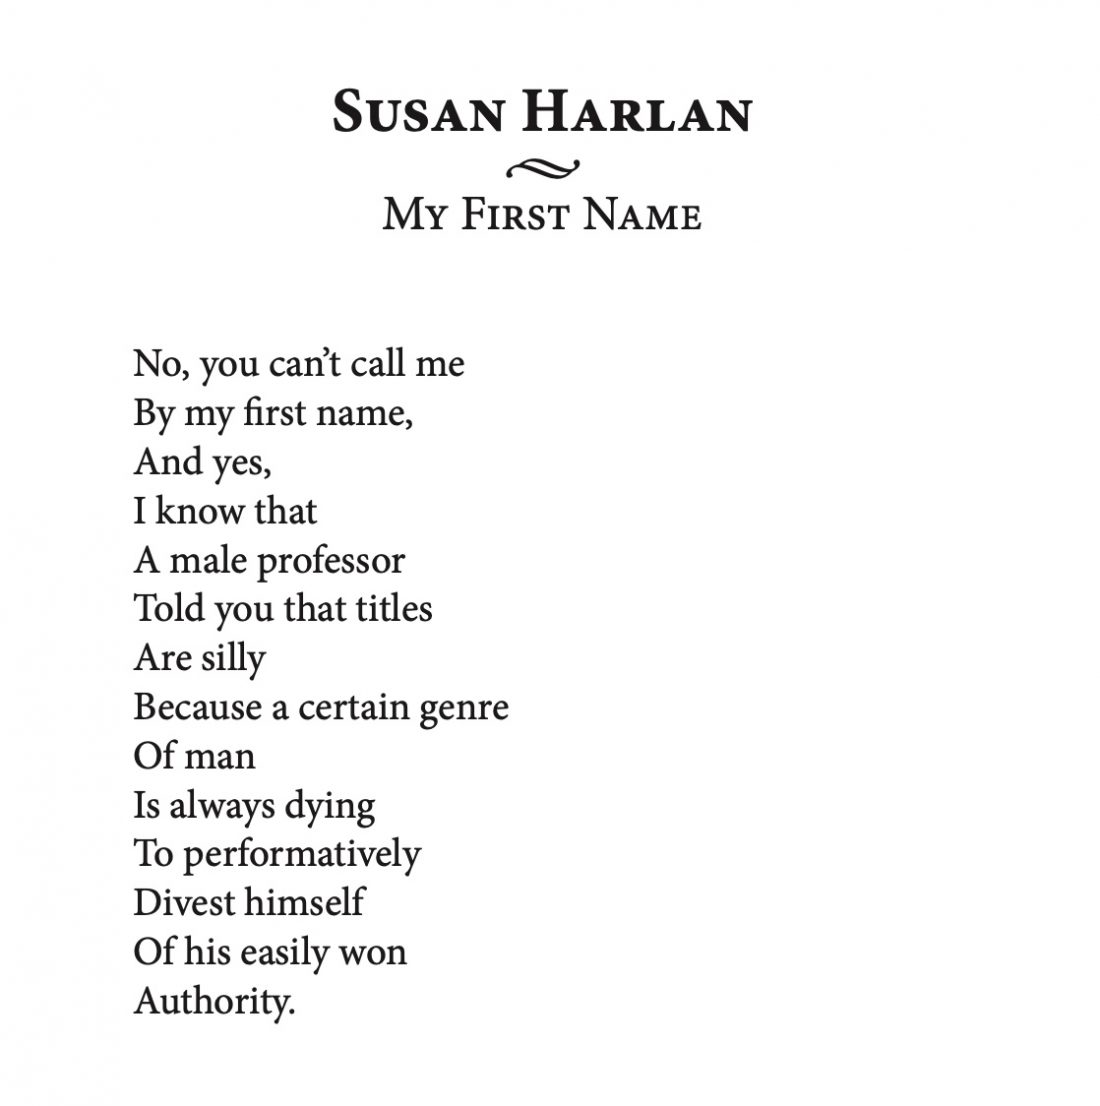 My First Name by Susan Harlan